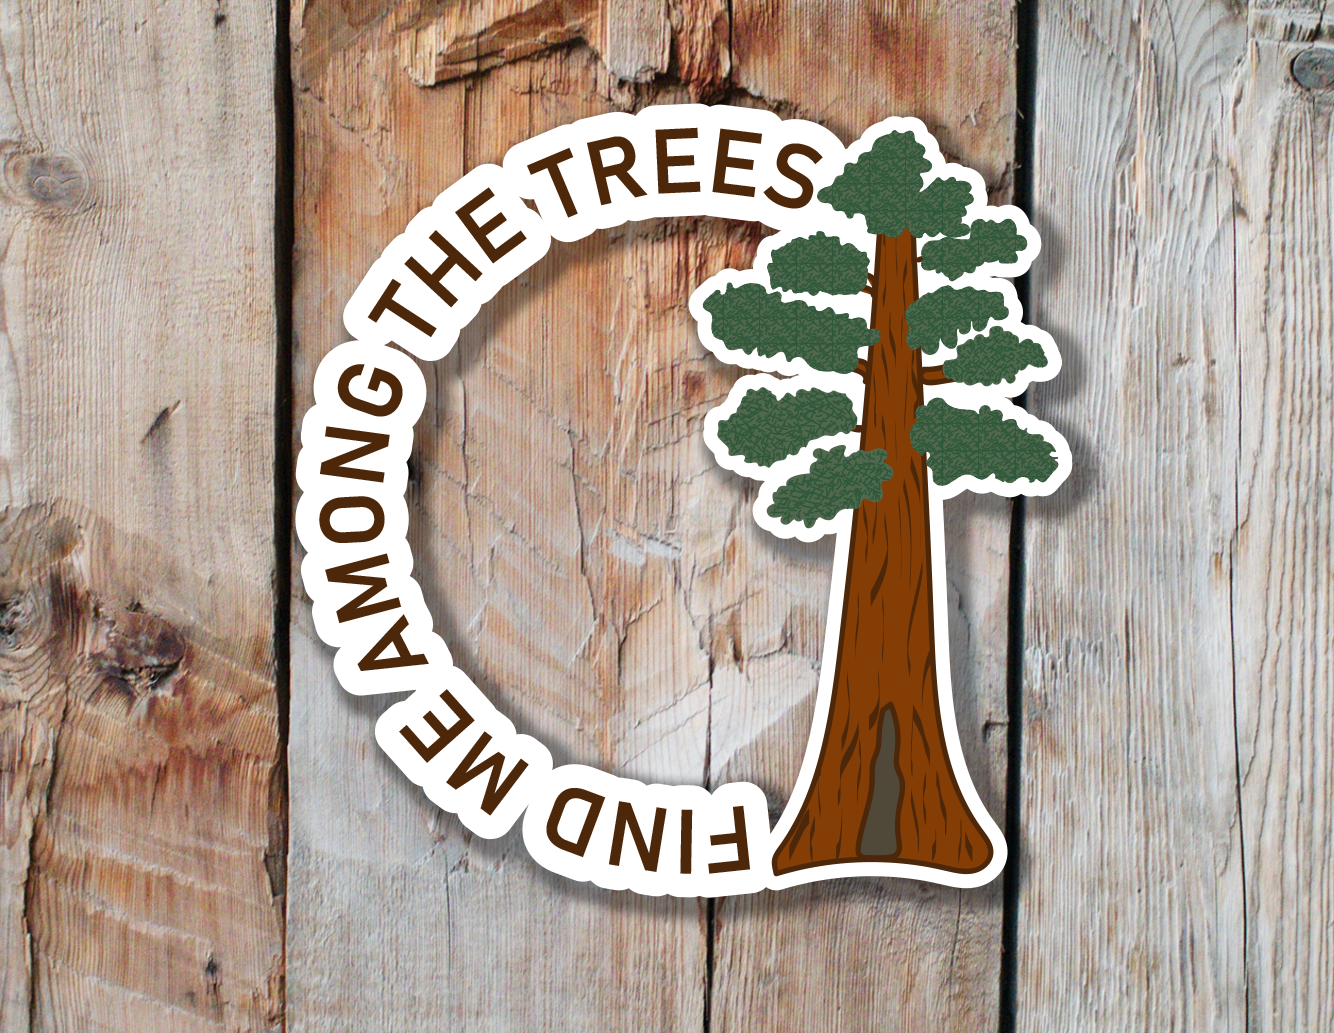 Giant Sequoia Sticker| Find Me Among the Trees Sticker